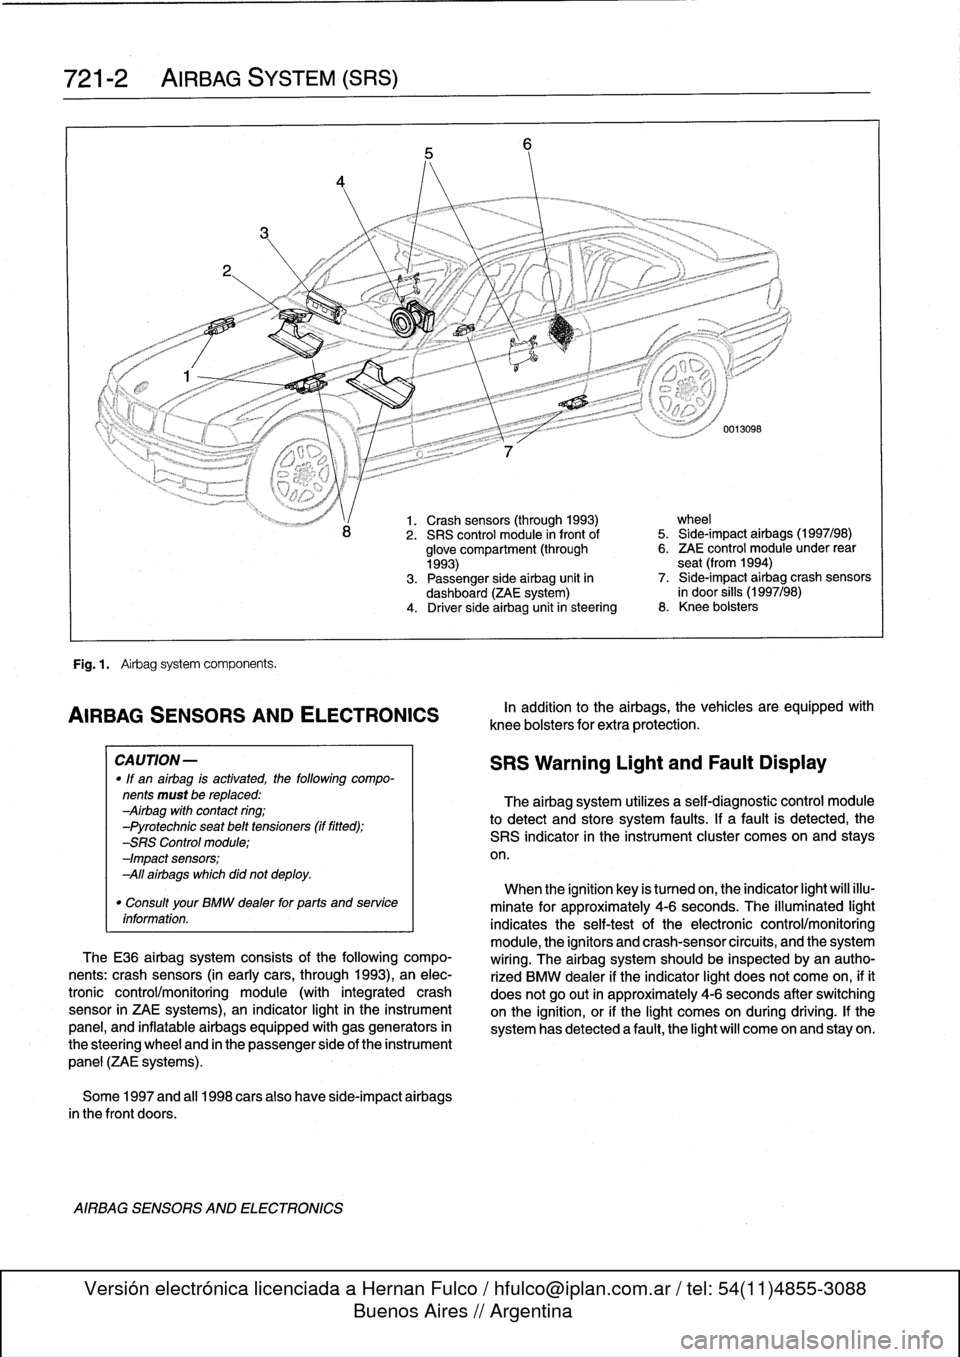 BMW 323i 1995 E36 Manual PDF 
721-2

	

AIRBAG
SYSTEM
(SRS)

Fig
.
1
.

	

Airbag
system
components
.

AIRBAG
SENSORSAND
ELECTRONICS

CA
UTION-

"
If
an
airbag
is
activated,
the
following
compo-
nents
must
be
replaced
:
Airbag
wi